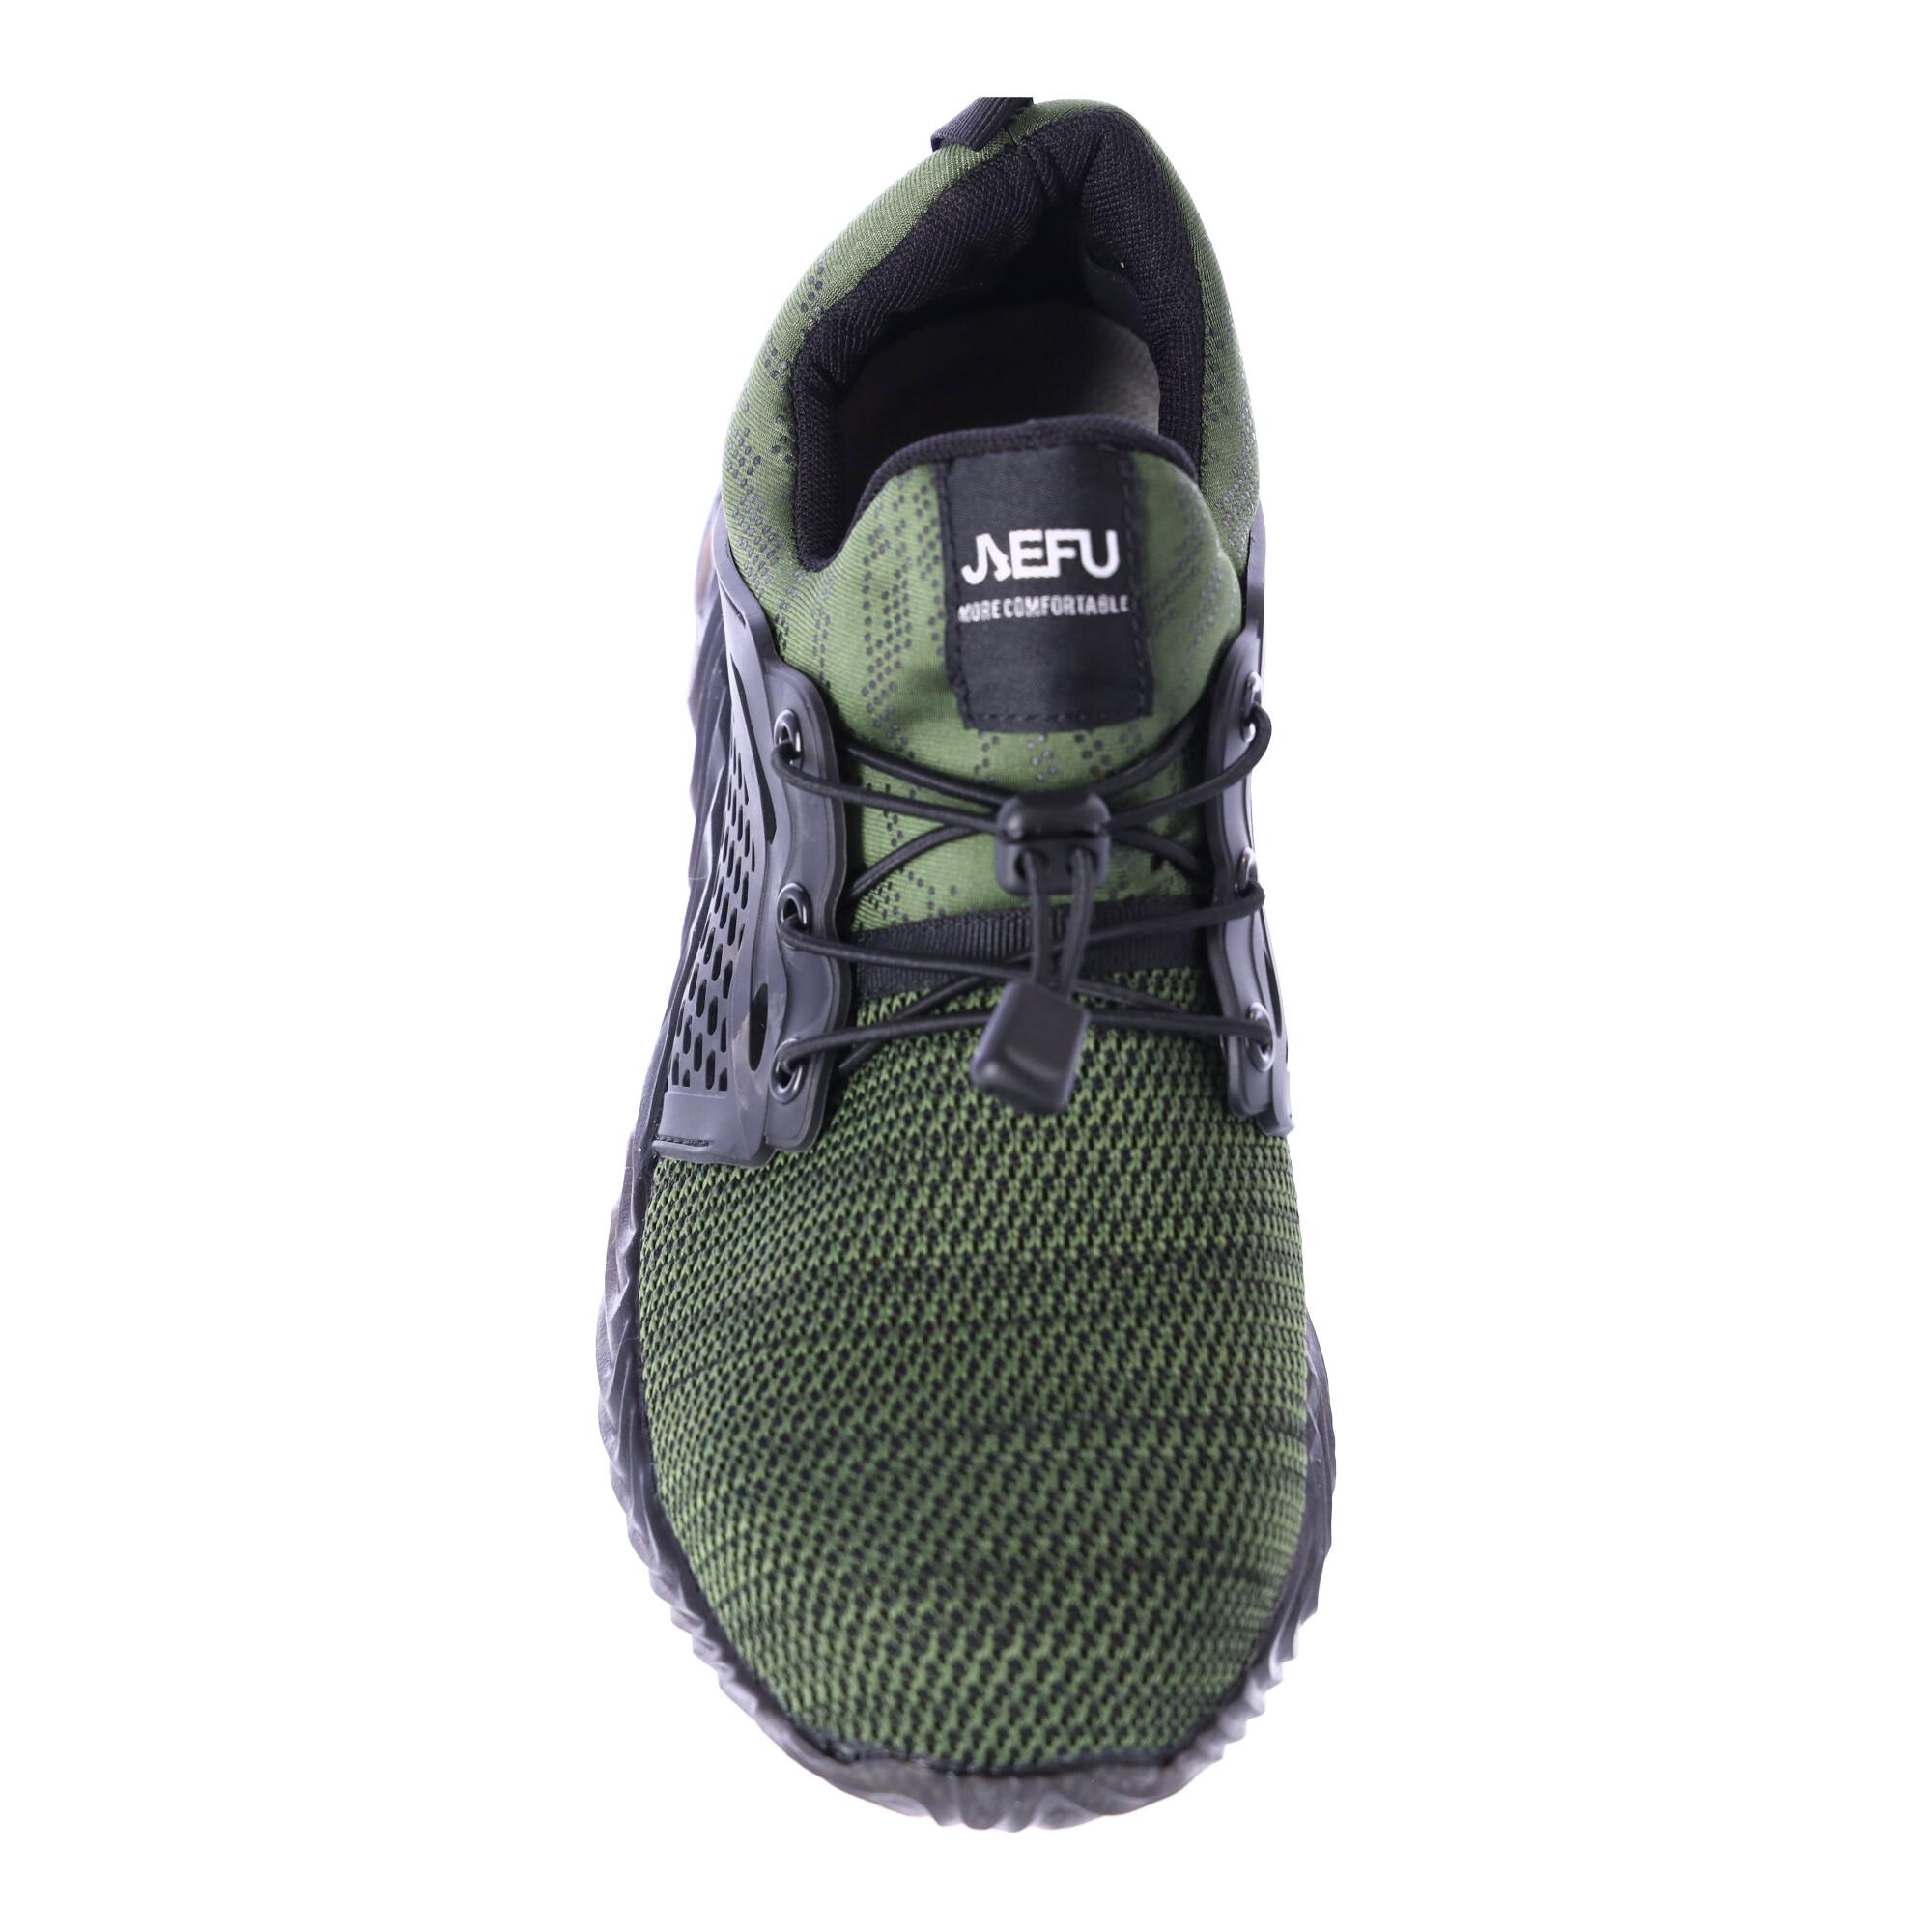 Work safety shoes "43" - green